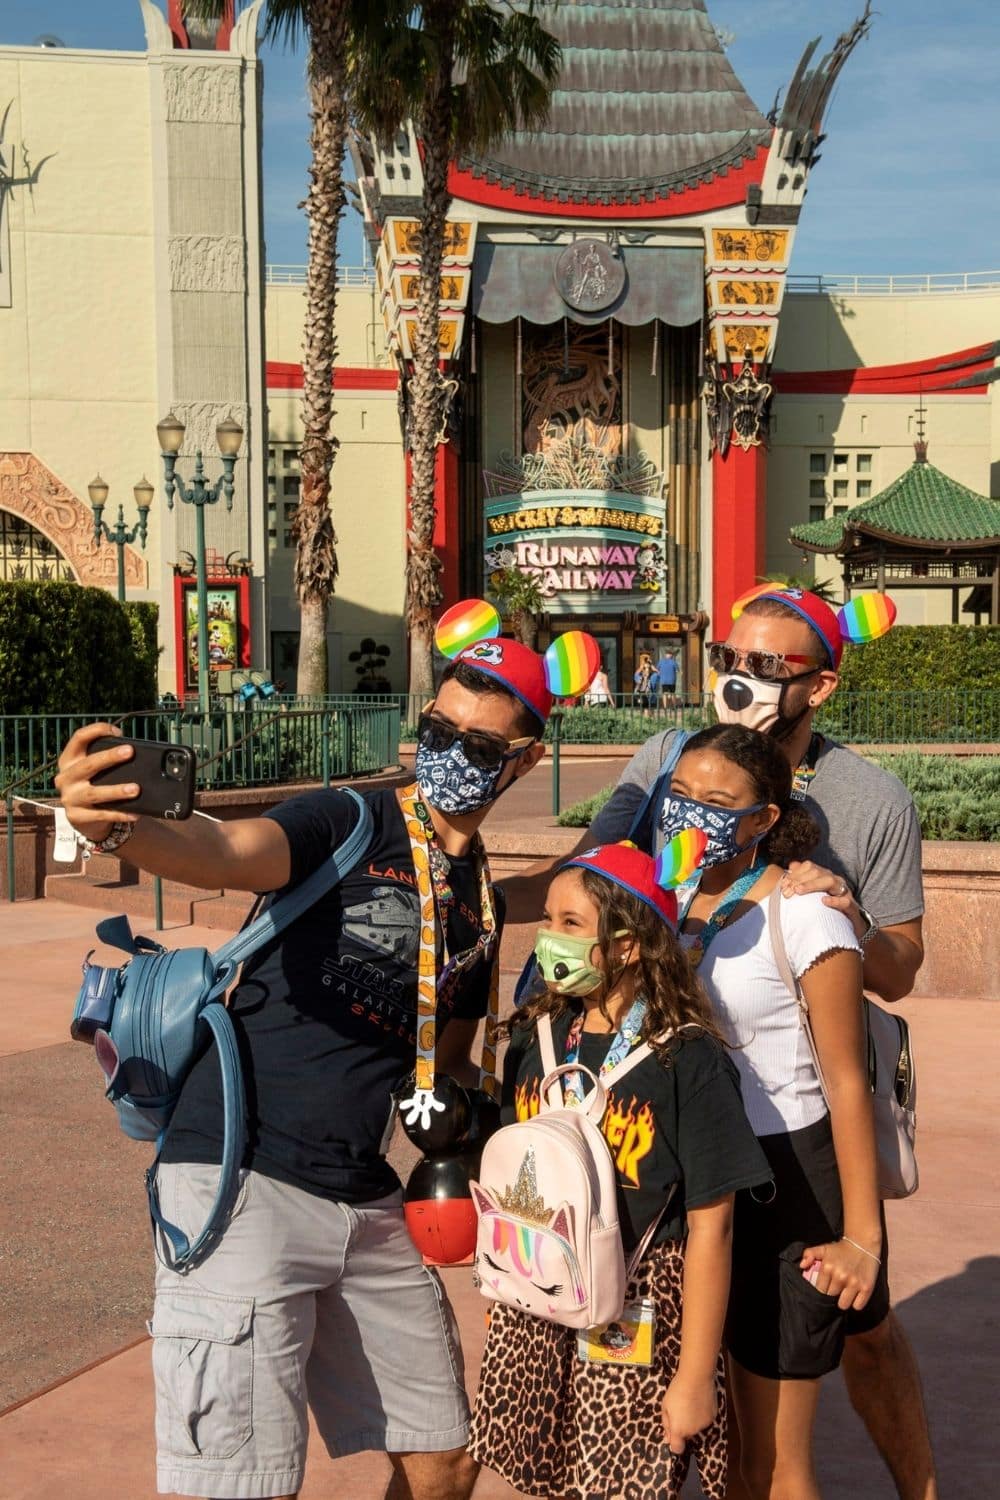 Photo of 2 dads with their 2 daughters taking an Instagram photo in front of Mickey & Minnie's Runaway Railway at Disney World's Hollywood Studios.